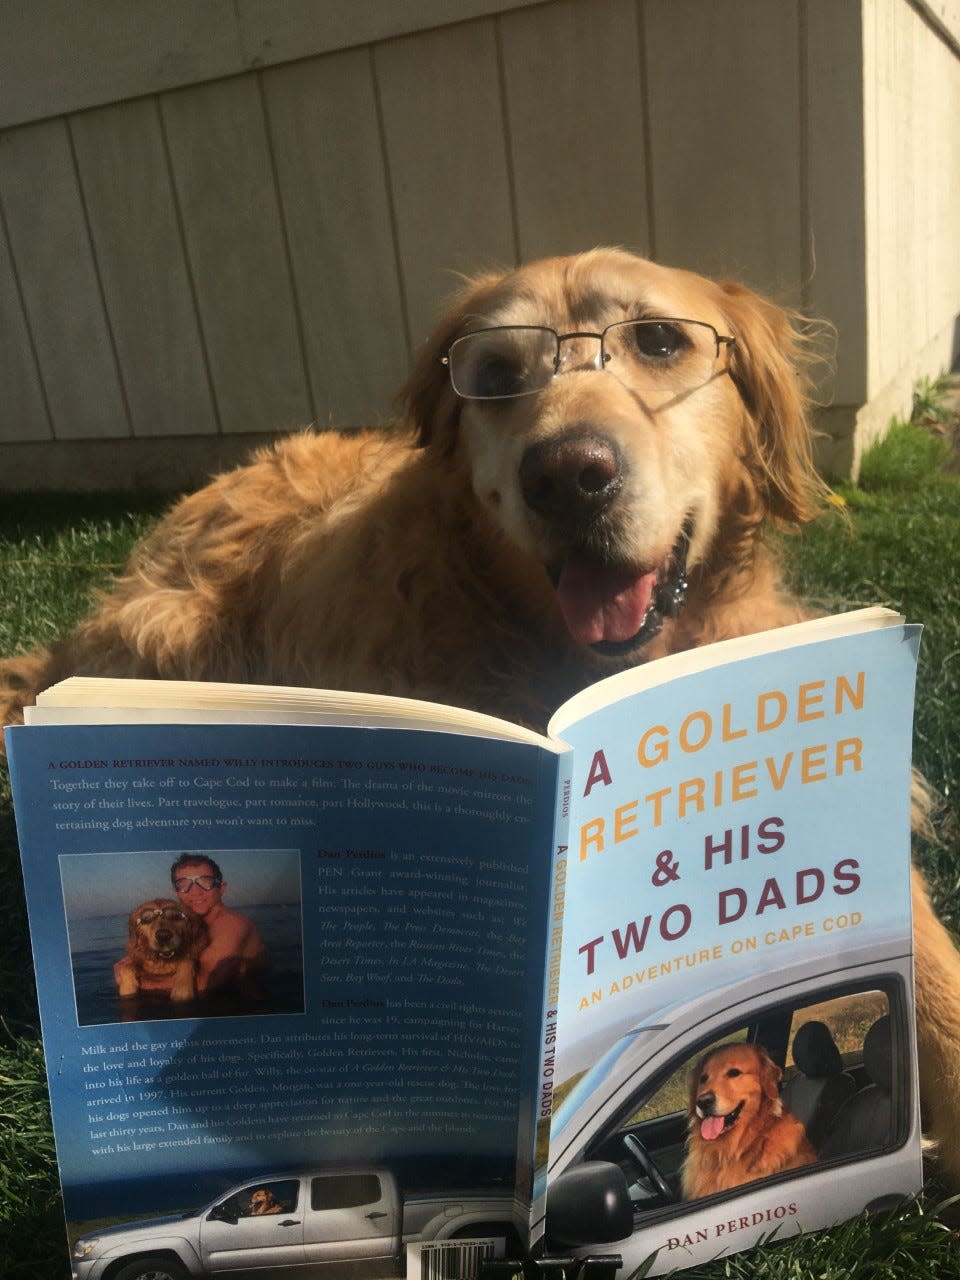 The book “A Golden Retriever & His Two Dads: An Adventure on Cape Cod” by Dan Perdios will be part of a movie and book event at Osterville Village Library.